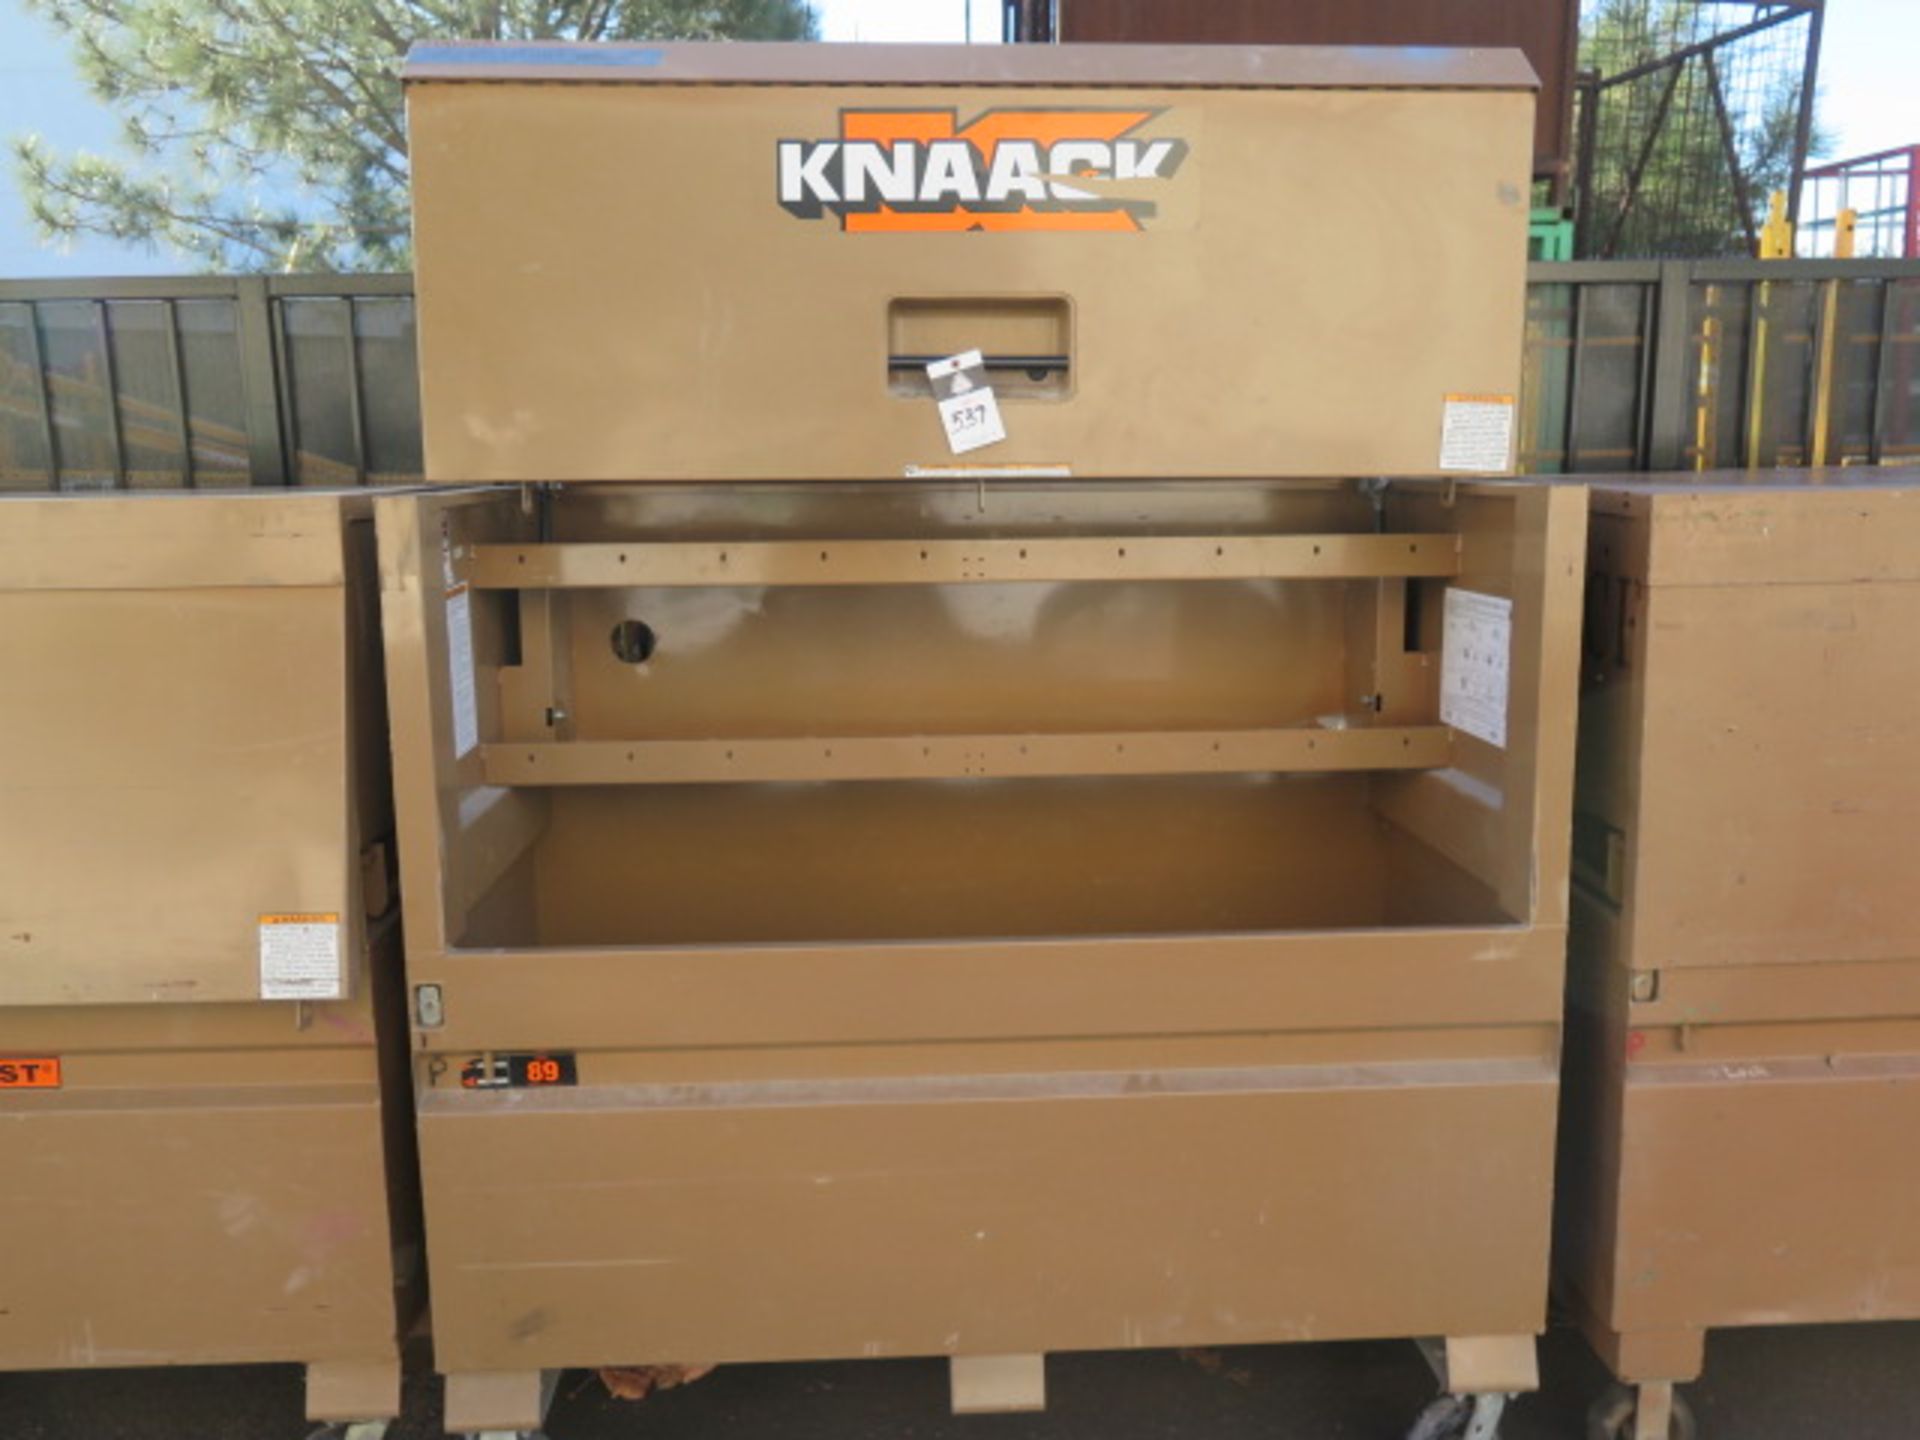 Knaack mdl. 89 "Storage Master" Rolling Job Box (SOLD AS-IS - NO WARRANTY) - Image 3 of 6